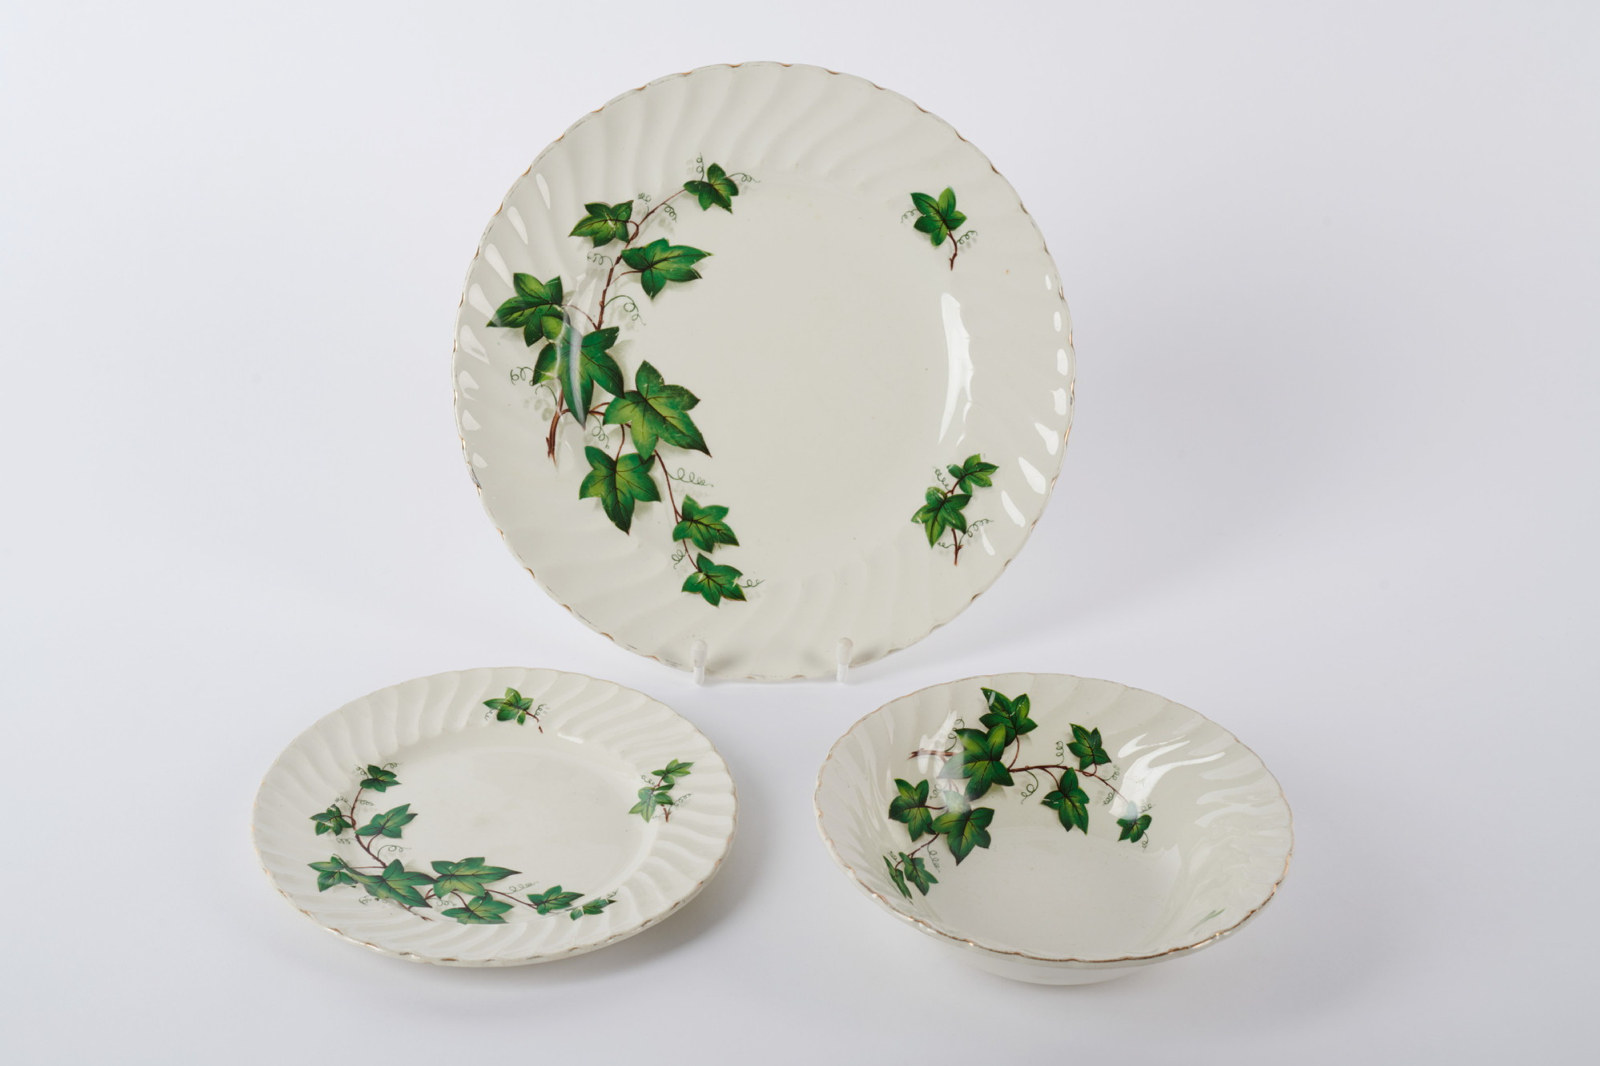 Three pieces of white crockery with green leaf design.